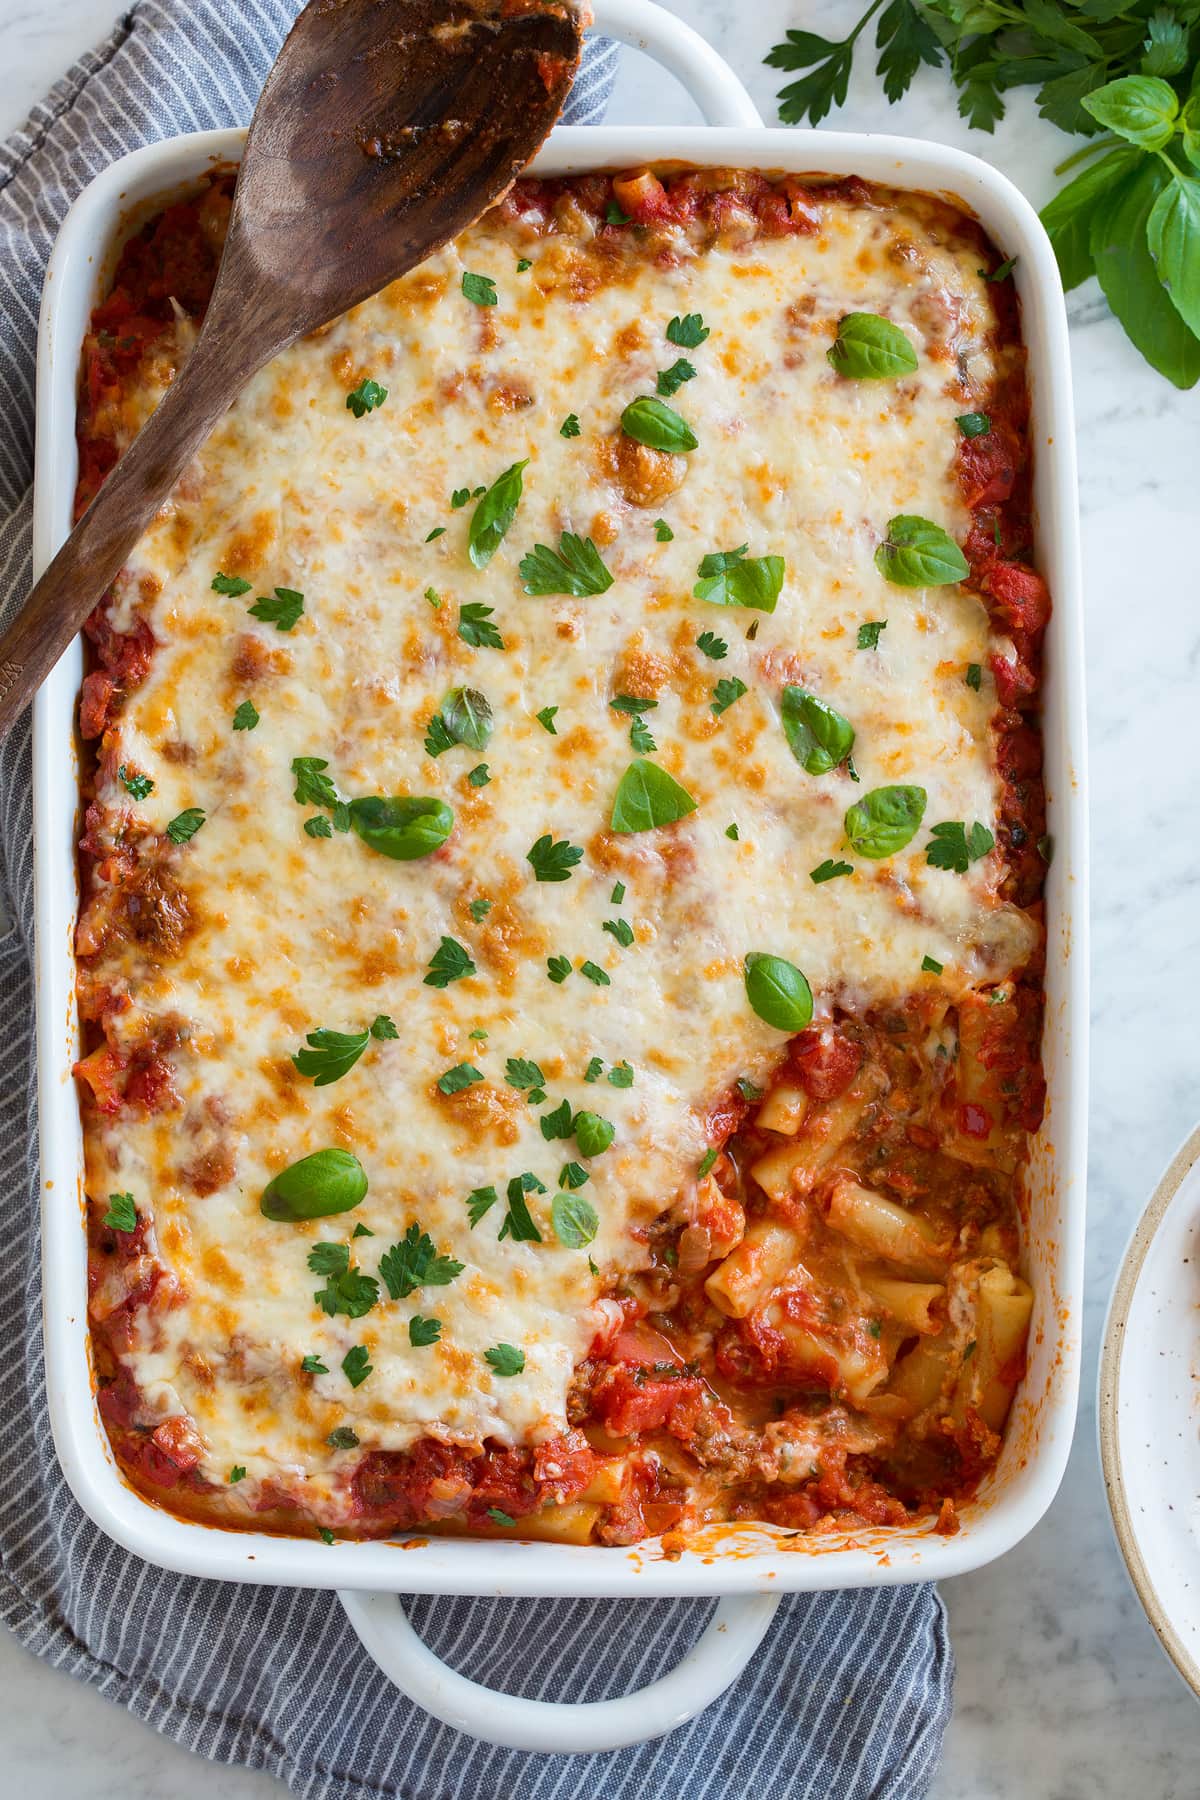 Baked Ziti in a casserole dish shown after baking with a lightly golden browned cheese topping. One scoop is removed to show interior.